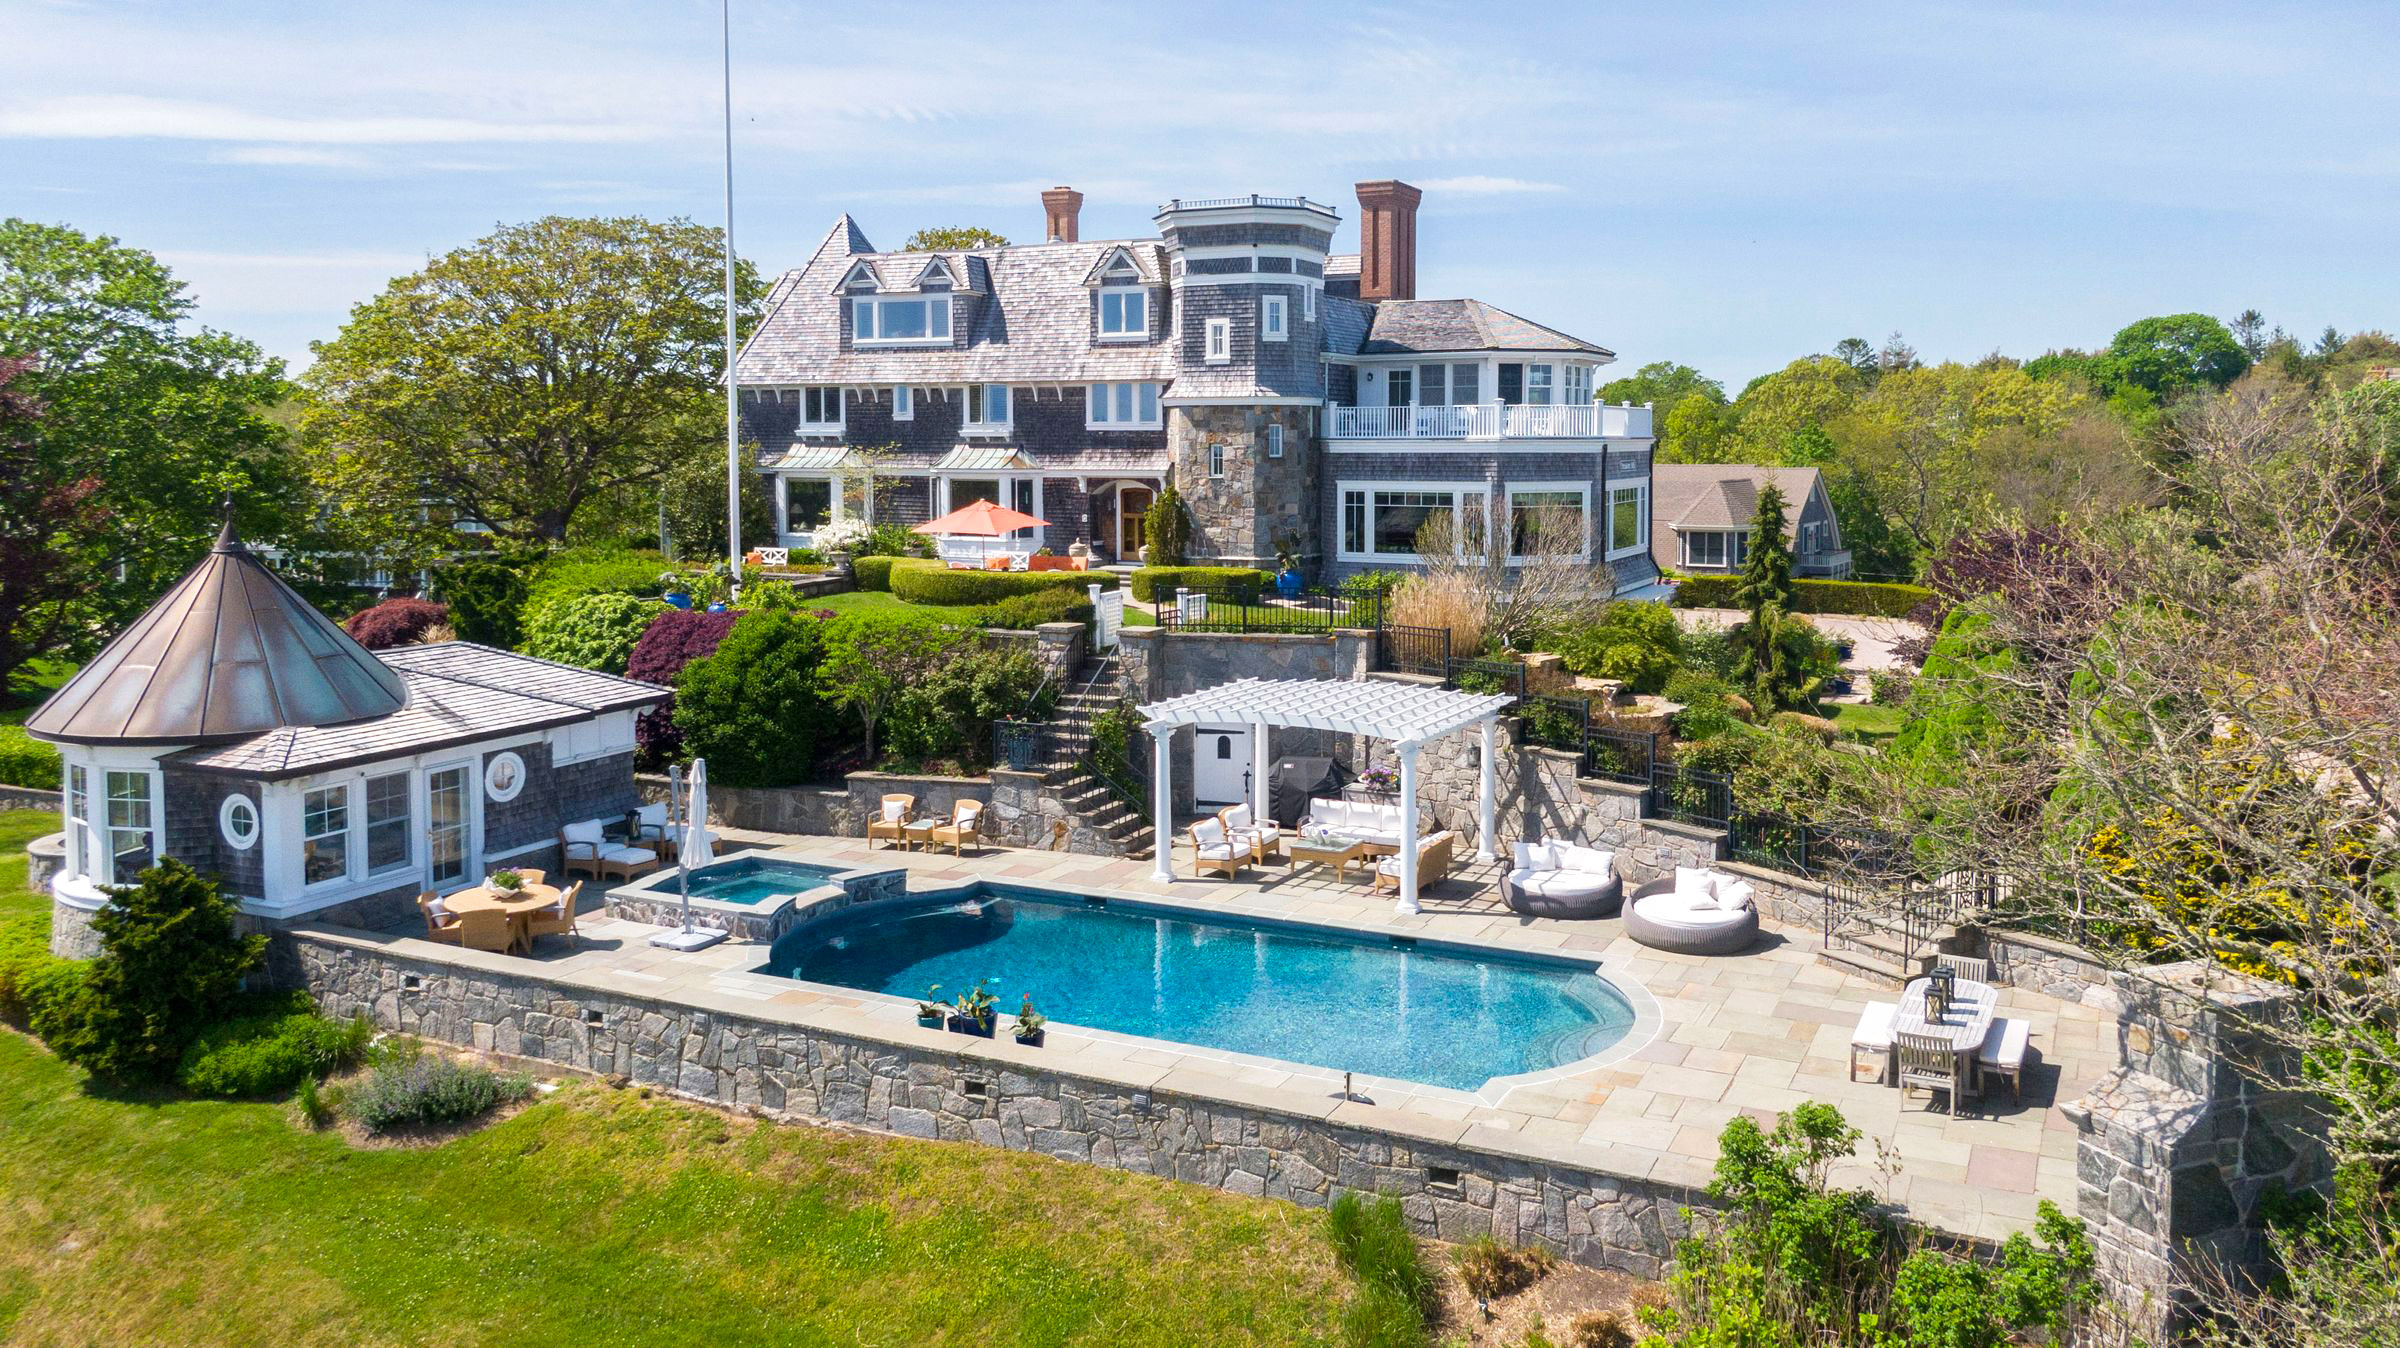 LILA DELMAN COMPASS SELLS STUNNING WATCH HILL ESTATE, MARKING THE HIGHEST SALE IN RHODE ISLAND THIS YEAR*